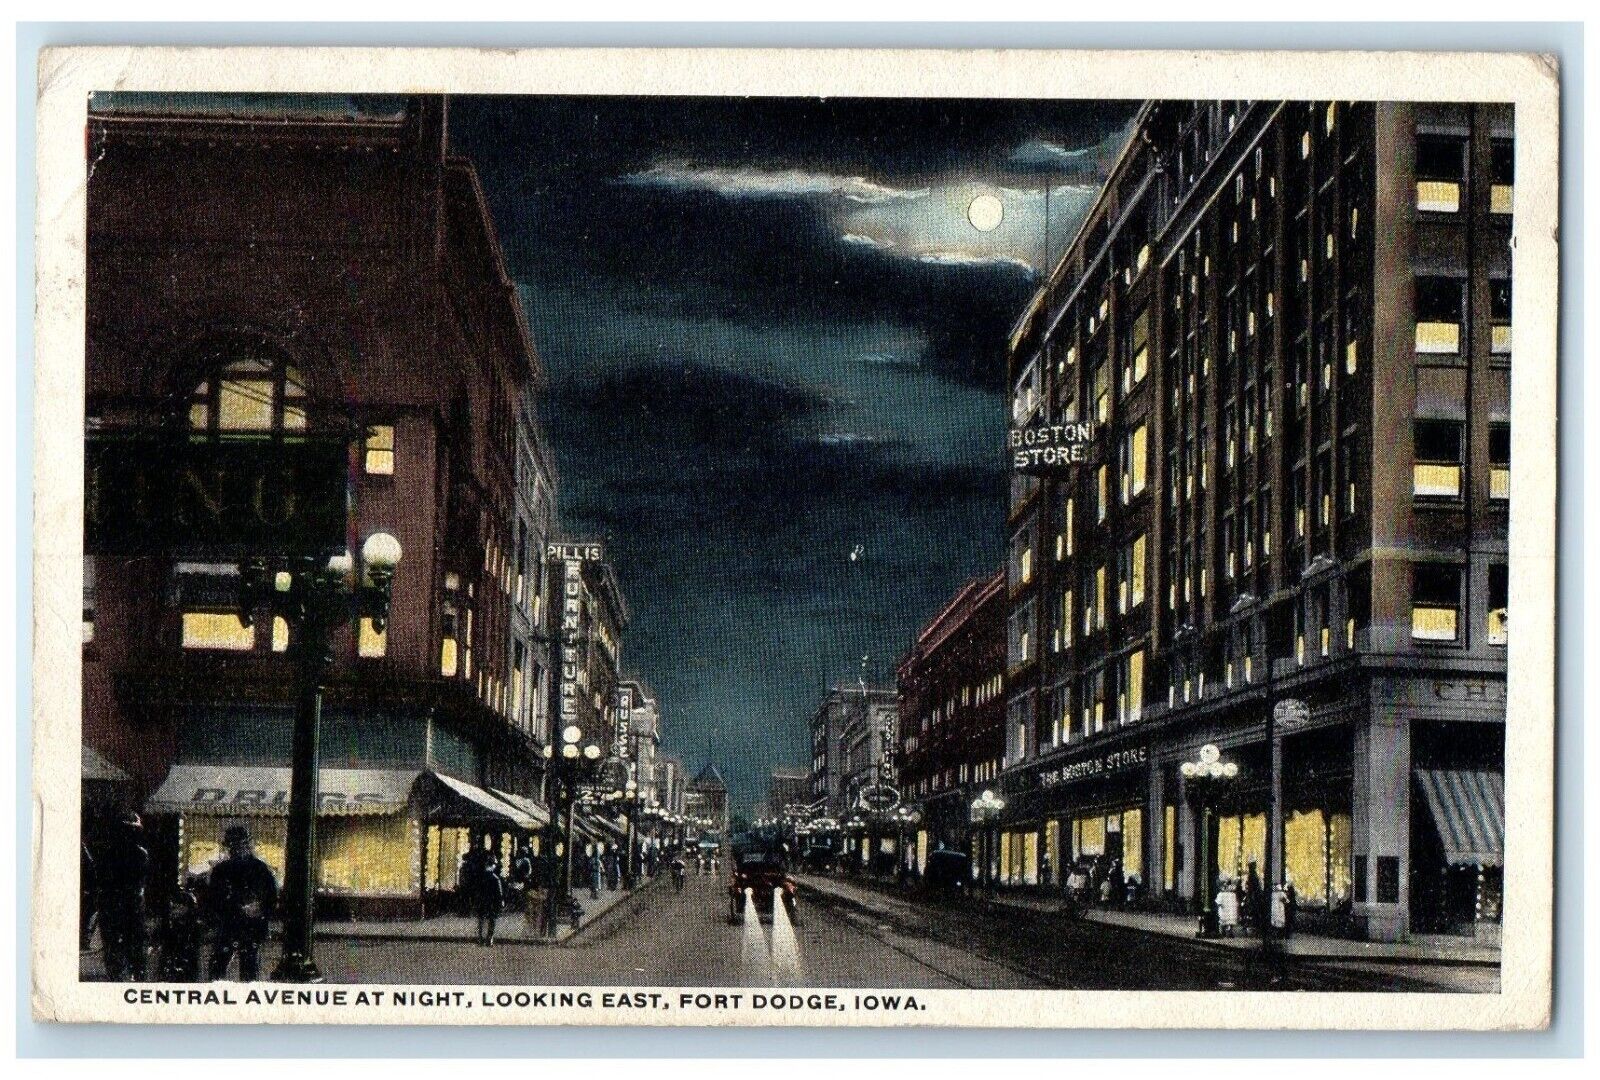 1917 Central Avenue At Night Looking East Boston Store Fort Dodge Iowa Postcard